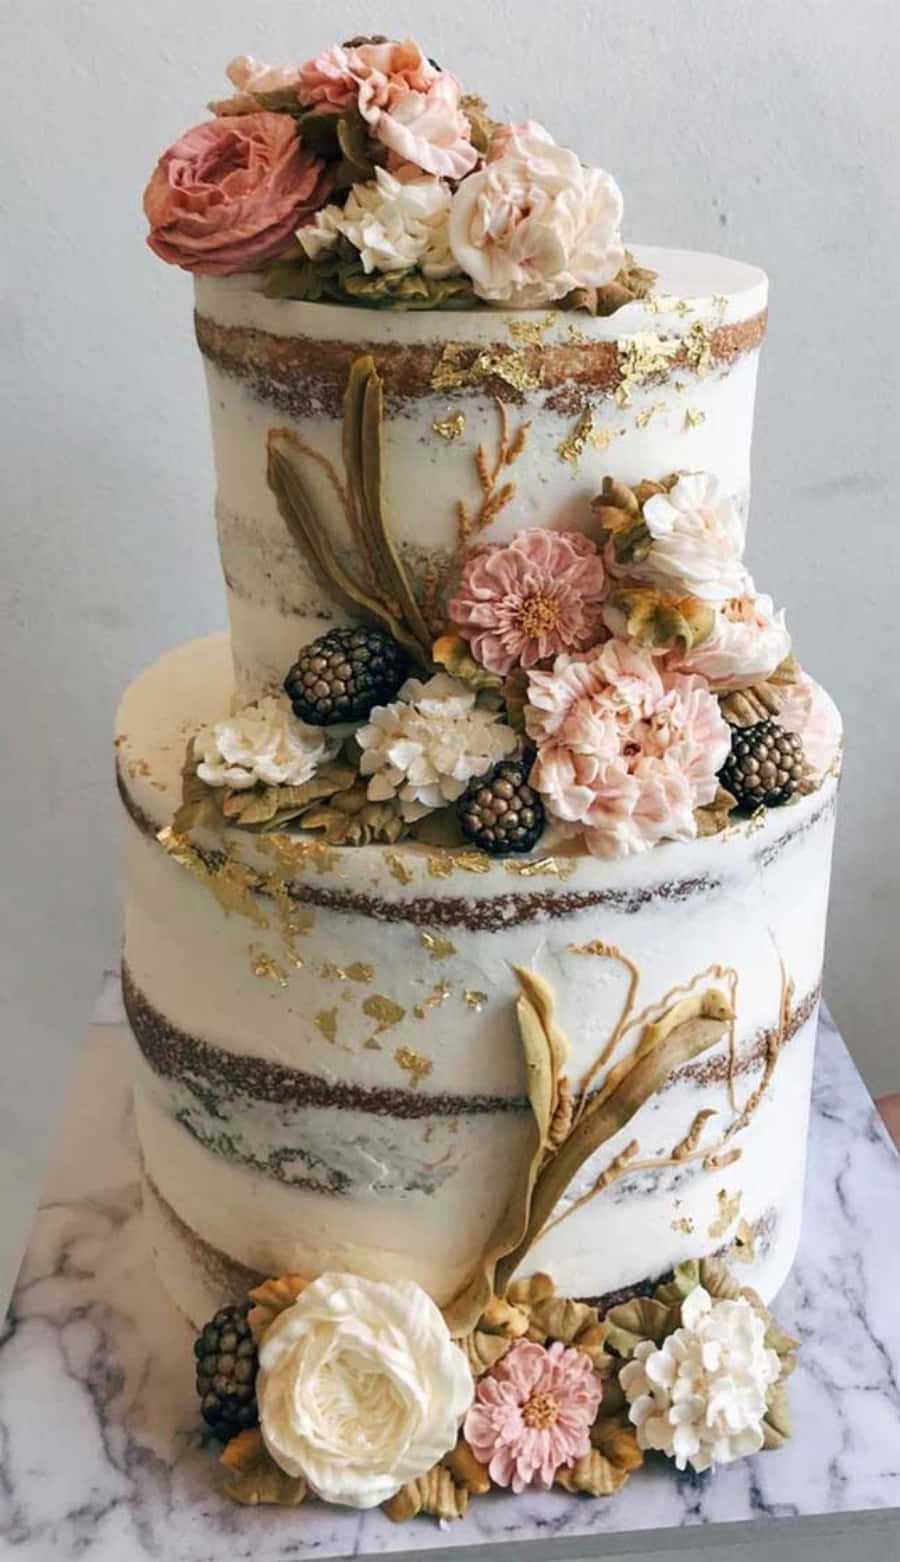 A Three Tier Cake With Flowers And Gold Decorations